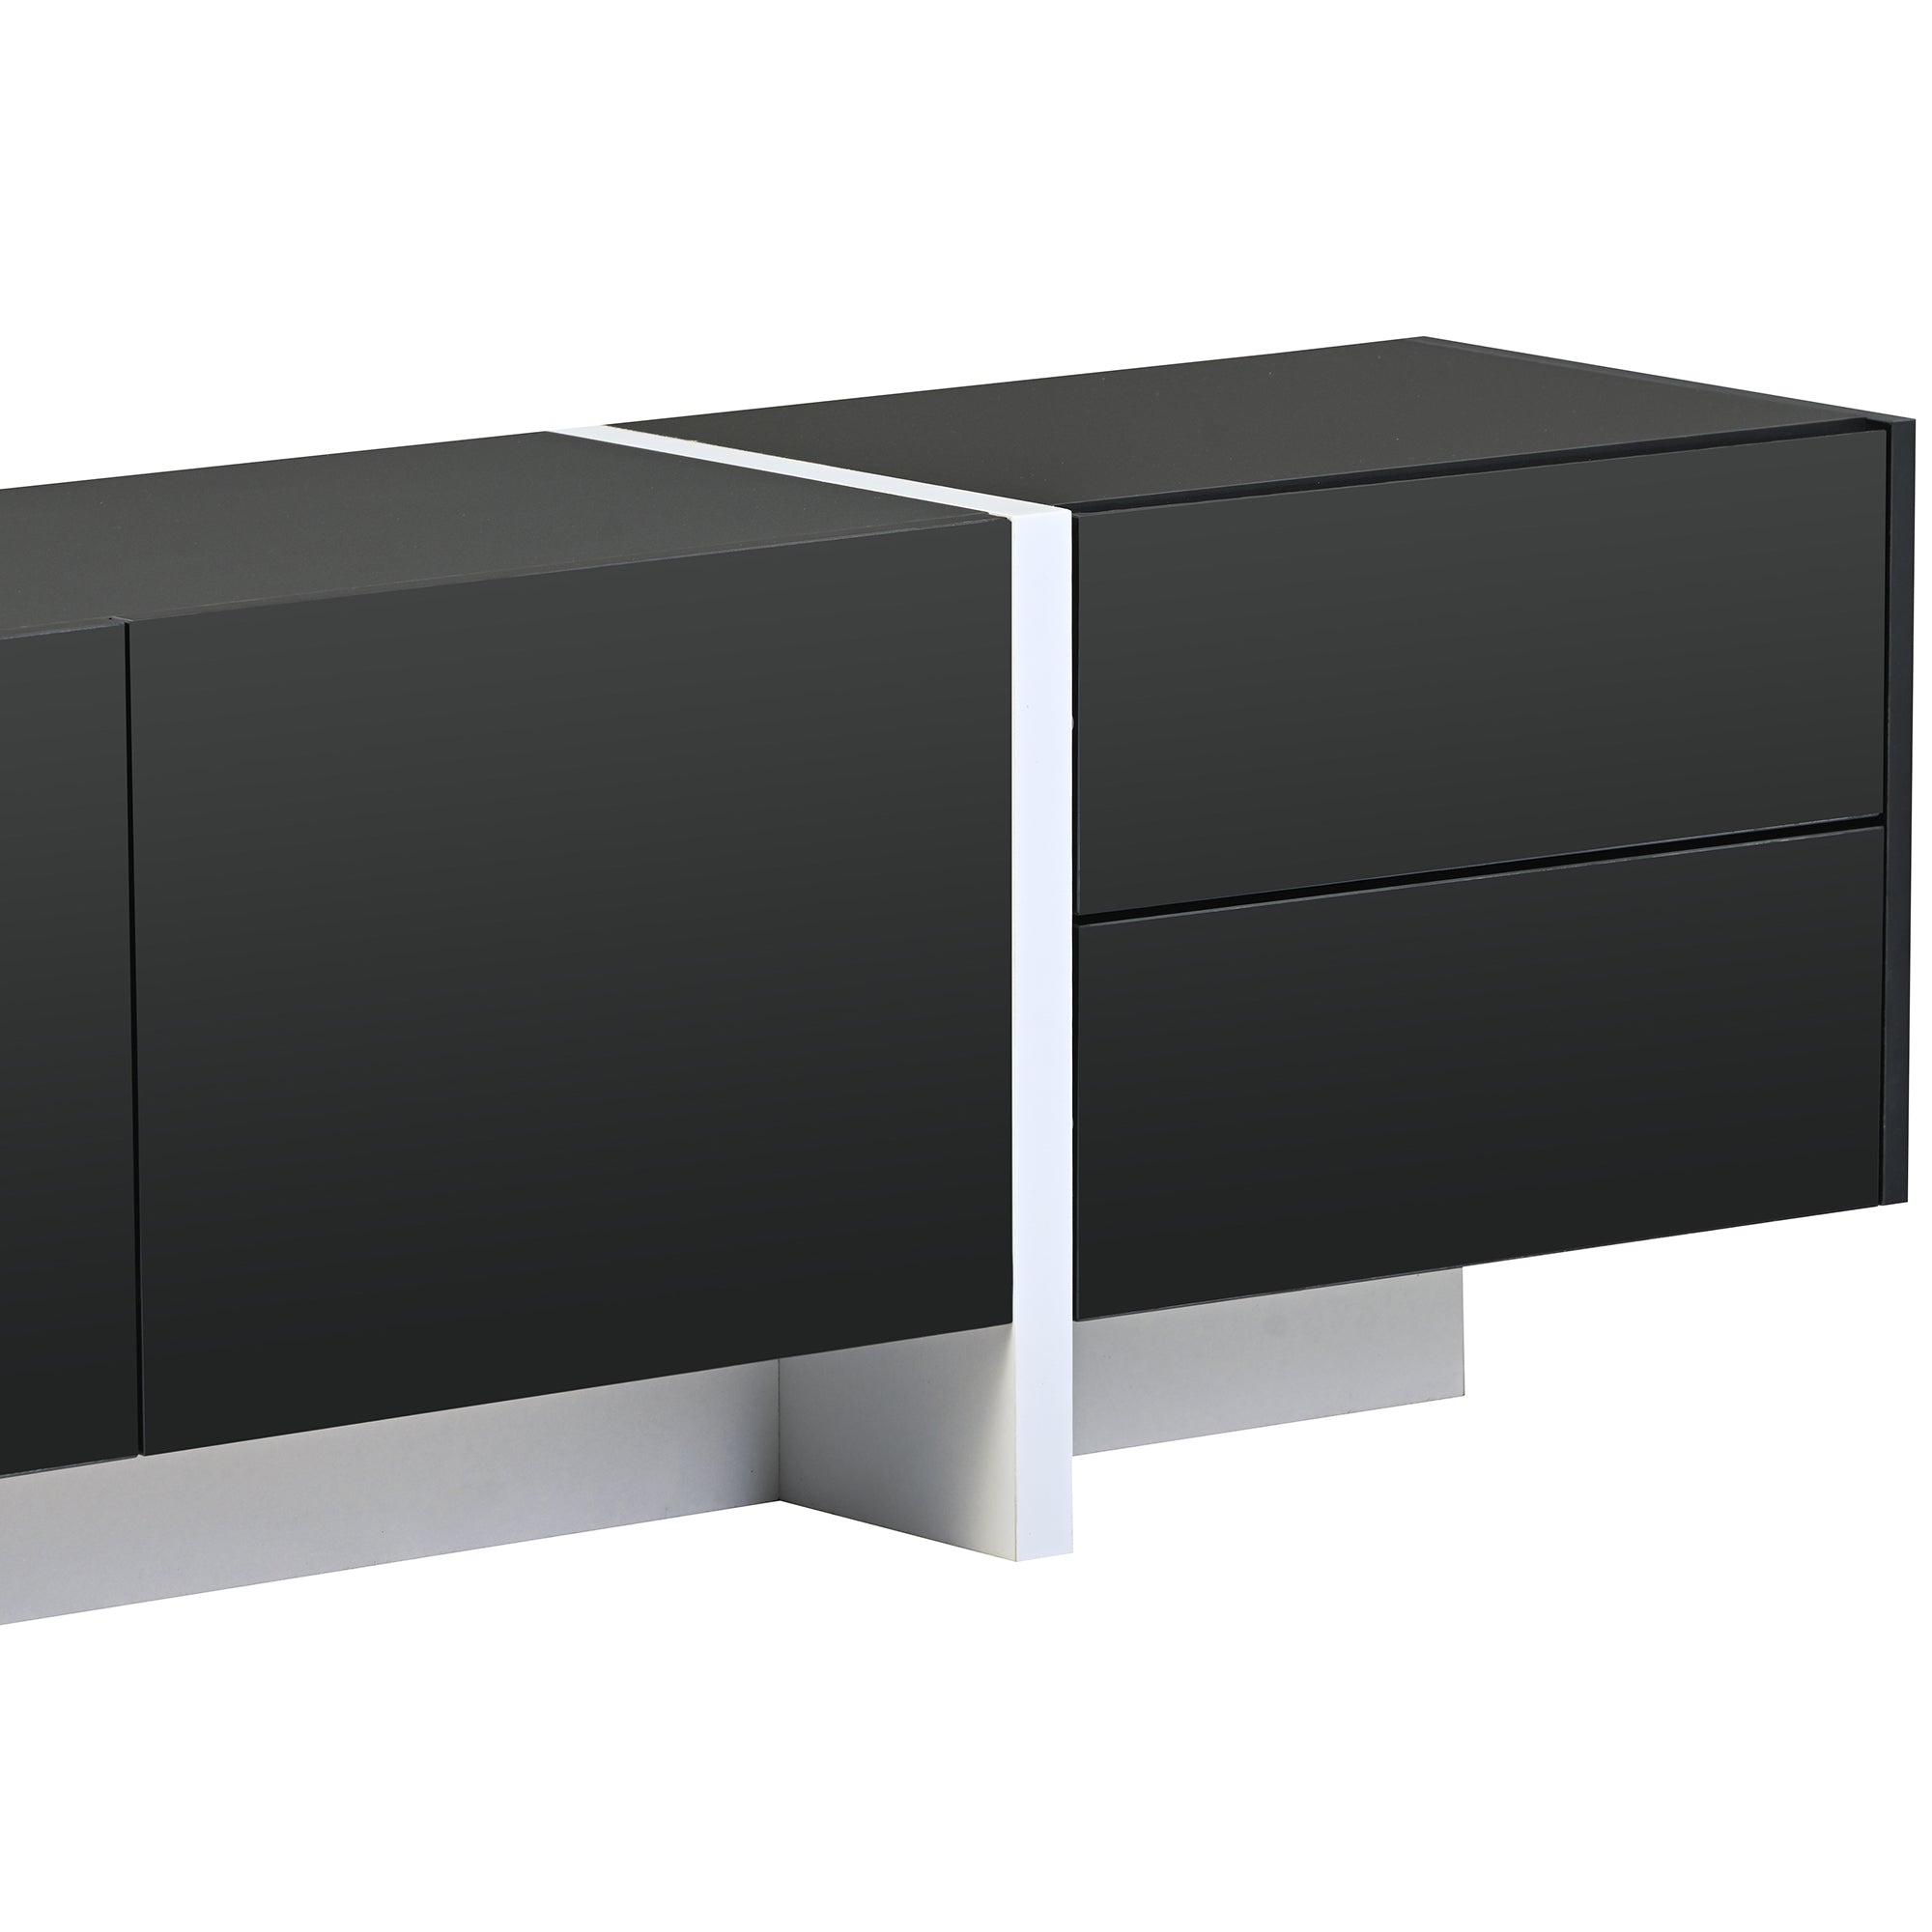 74.80" Black Glossy with White Stripe Line TV Stand Fits TV up to 86"